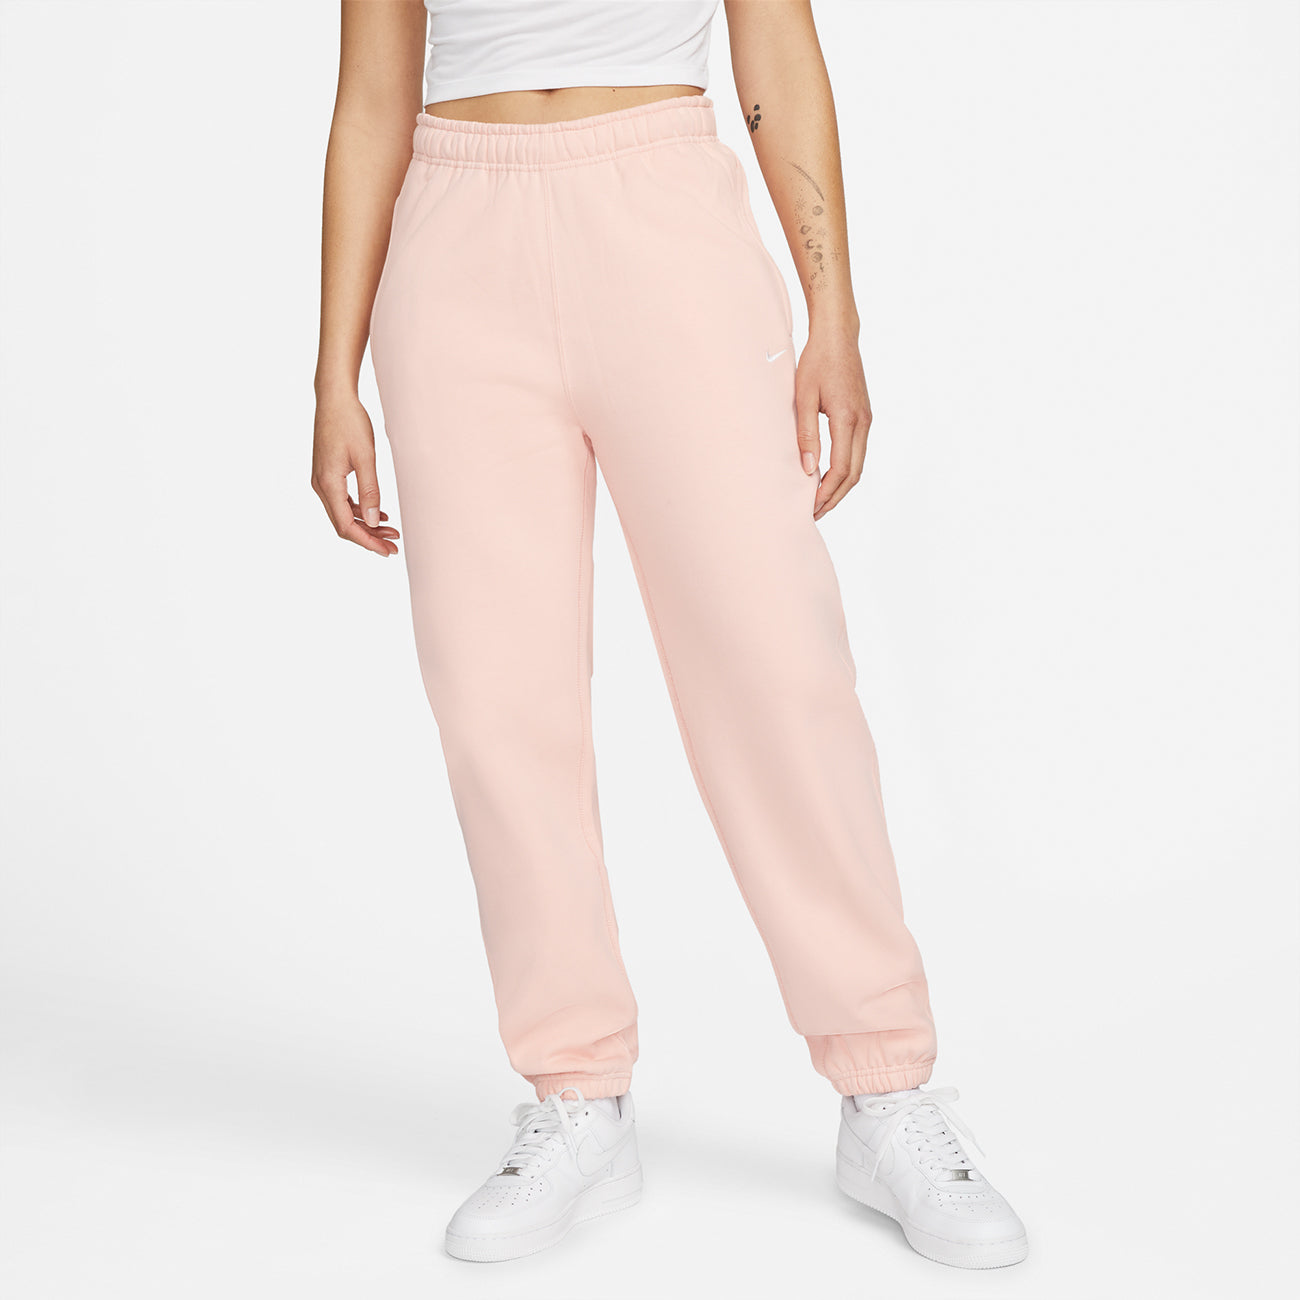 Women's Soloswoosh Fleece Pant - Bleached Coral/White